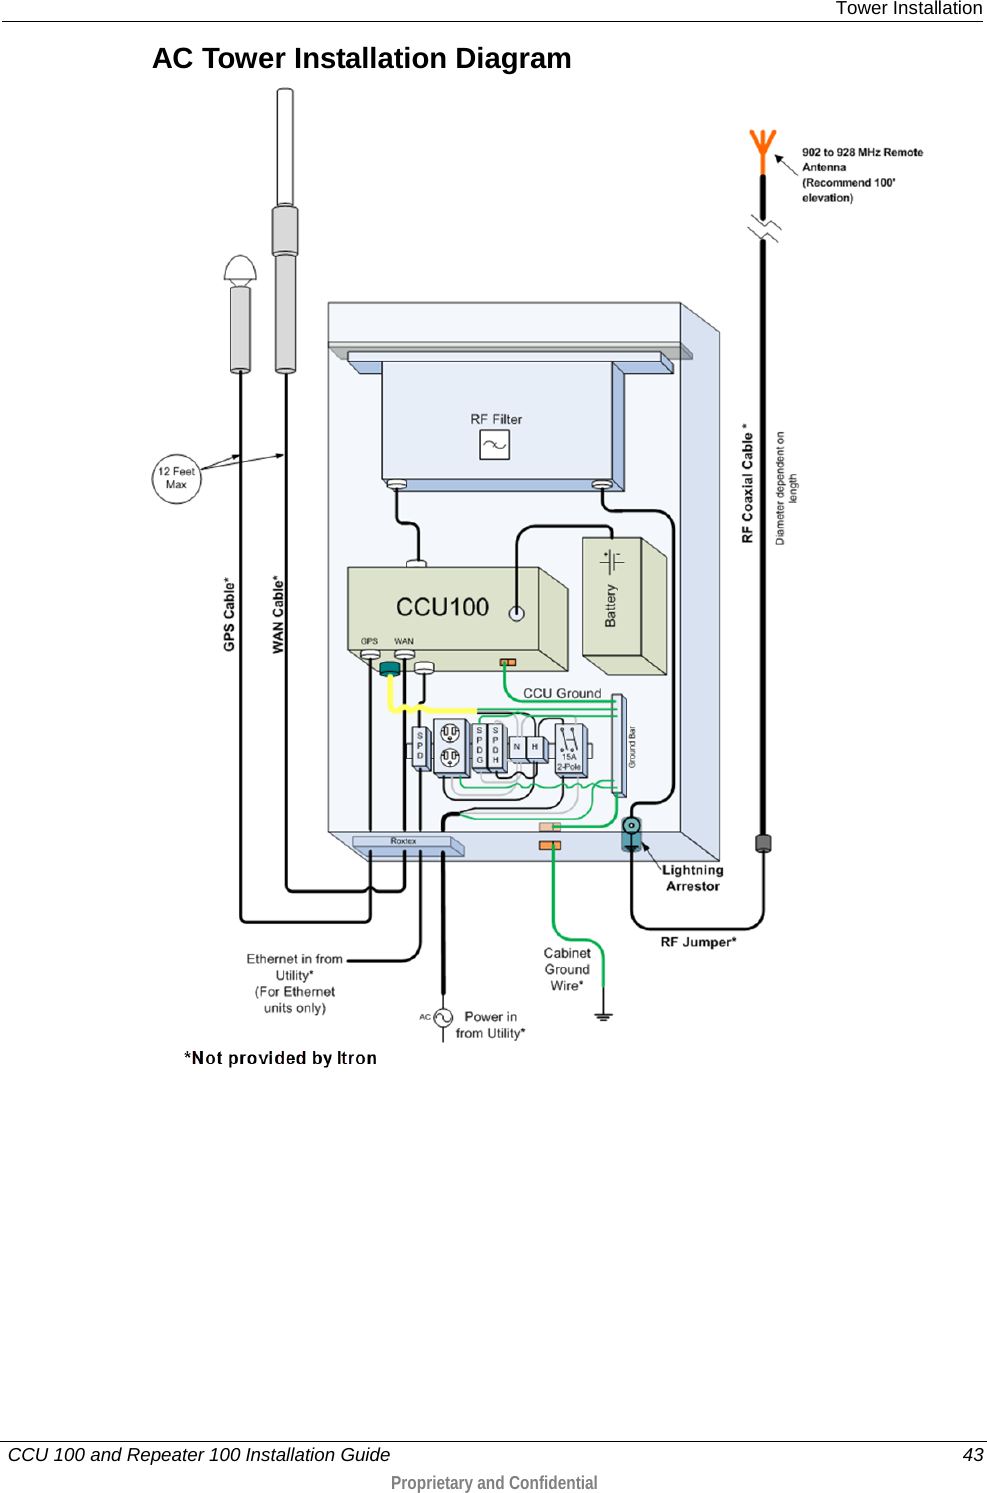  Tower Installation   CCU 100 and Repeater 100 Installation Guide    43  Proprietary and Confidential  AC Tower Installation Diagram  